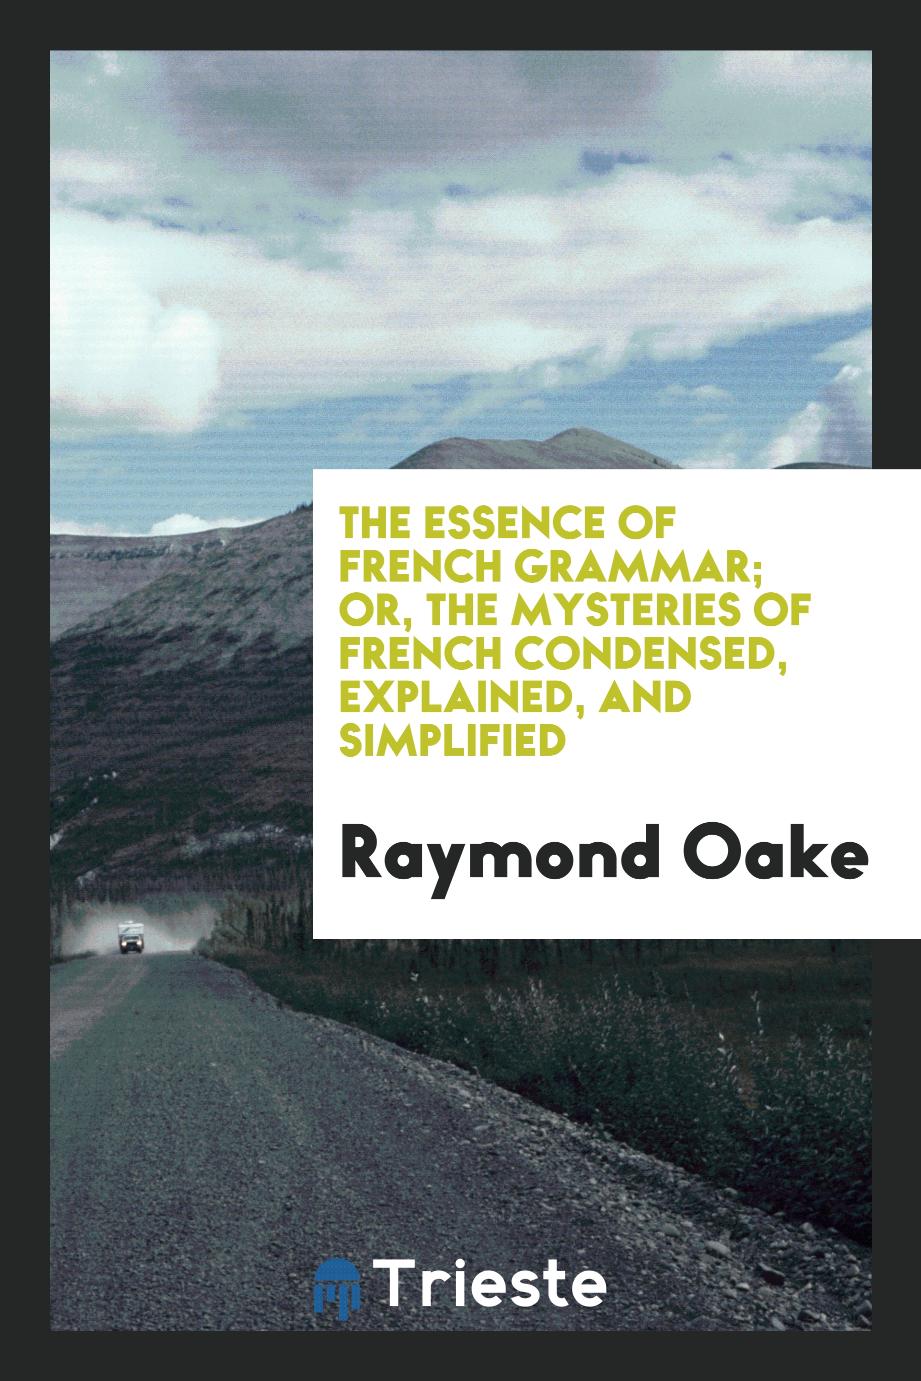 The essence of French grammar; or, The mysteries of French condensed, explained, and simplified